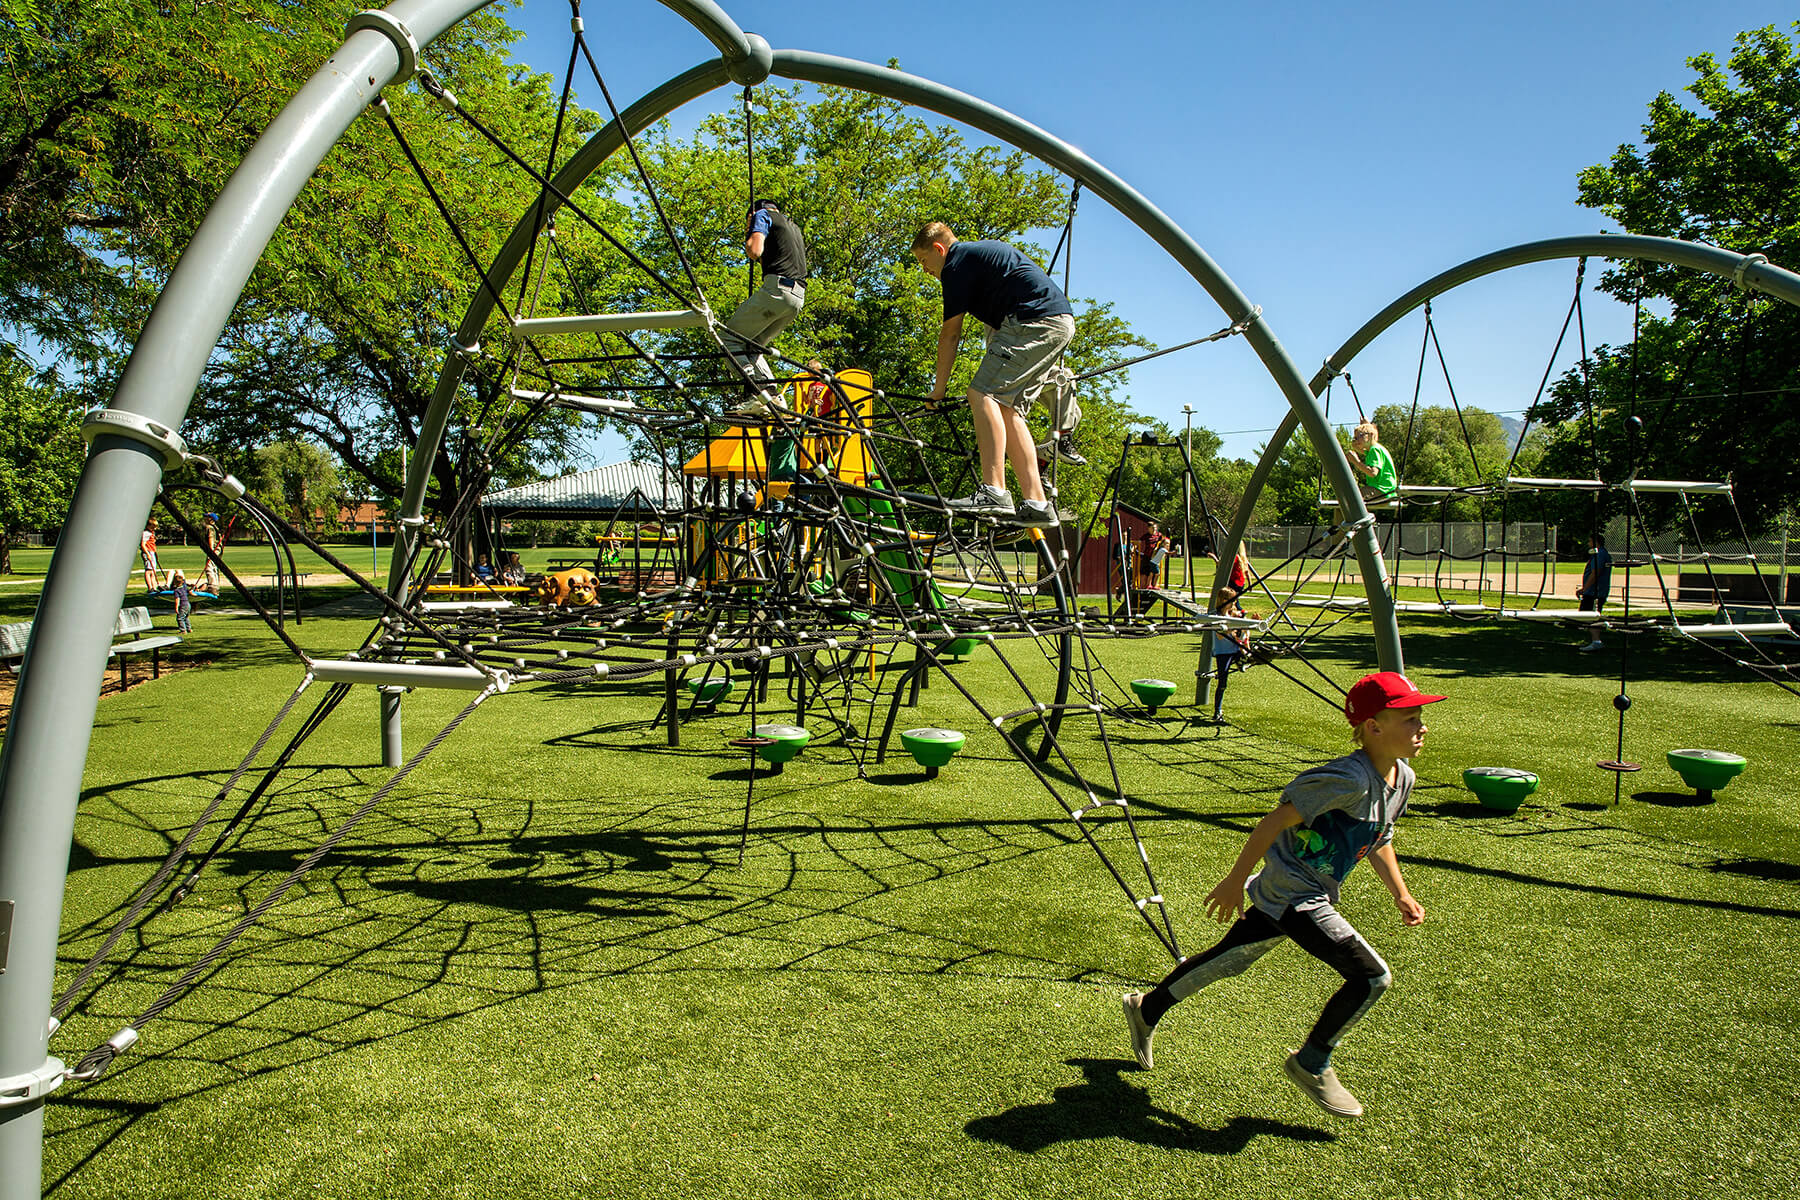 Children playing on a playground with artificial turf